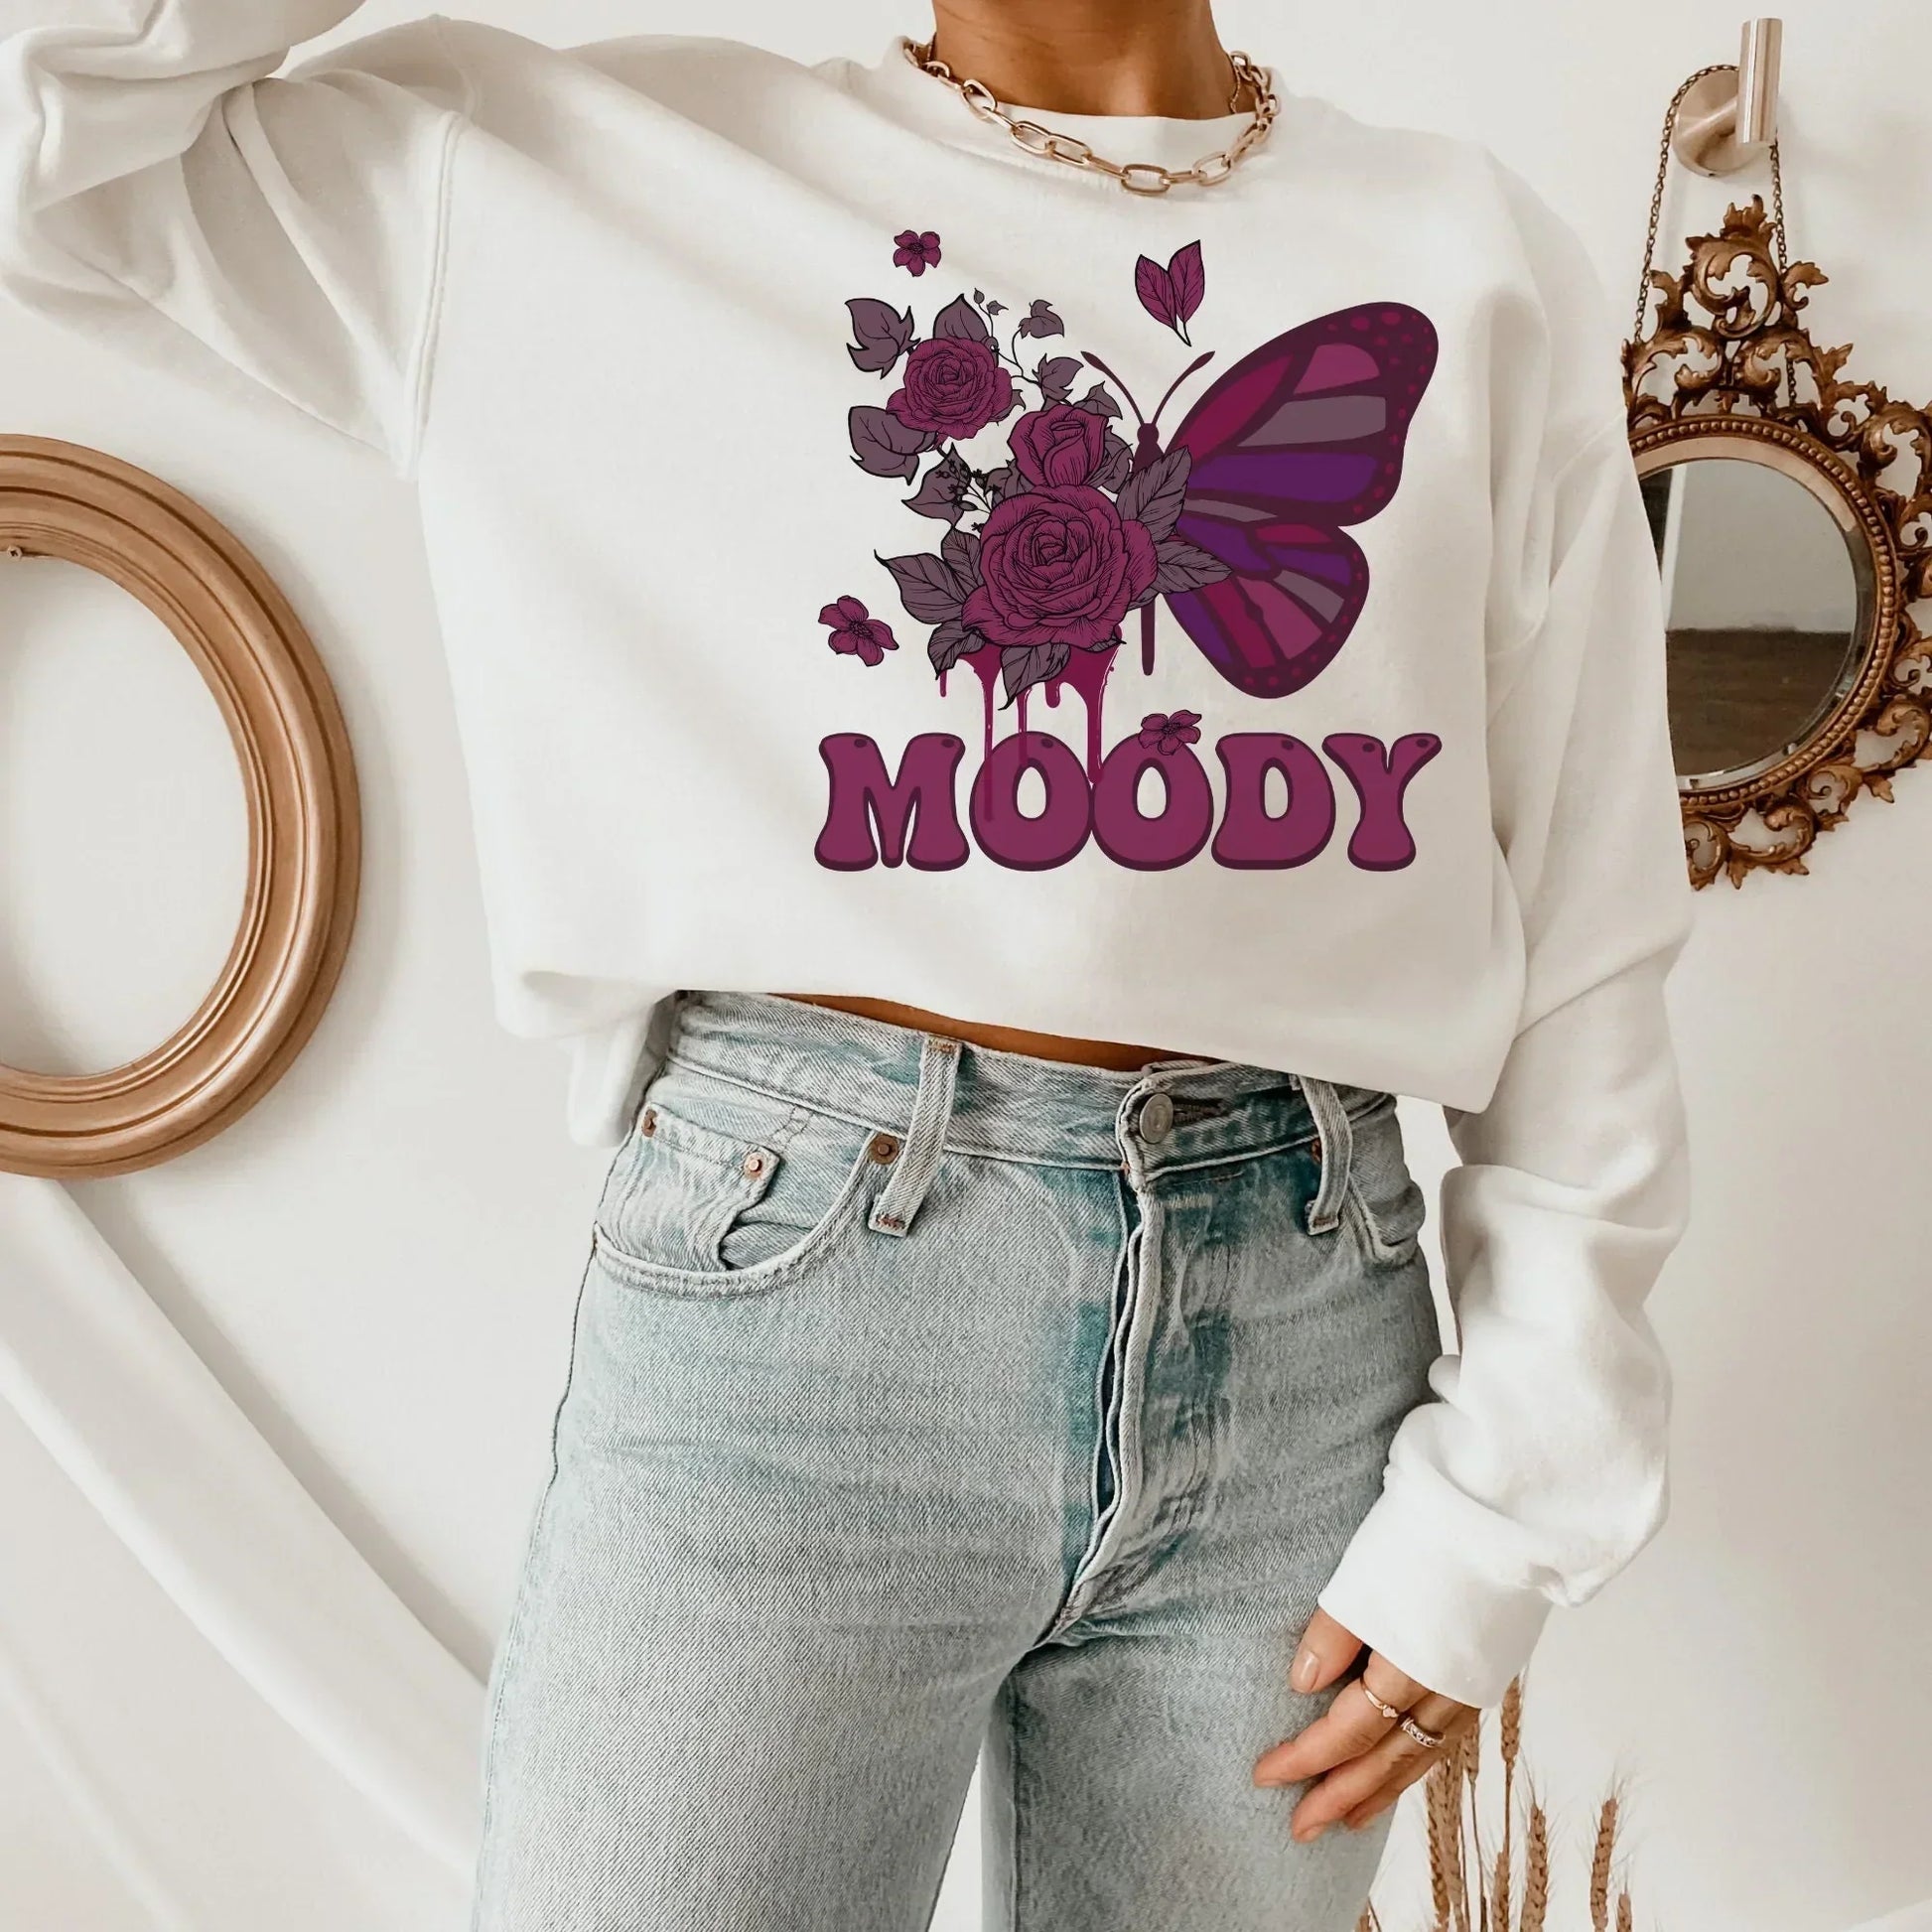 Gothic Shirt, Goth Clothing, Moody Tshirt, Spooky Halloween Sweatshirt, Witchy Vibes, Butterfly Shirt, Moon Shirt, Magical Witch Shirt, EMO